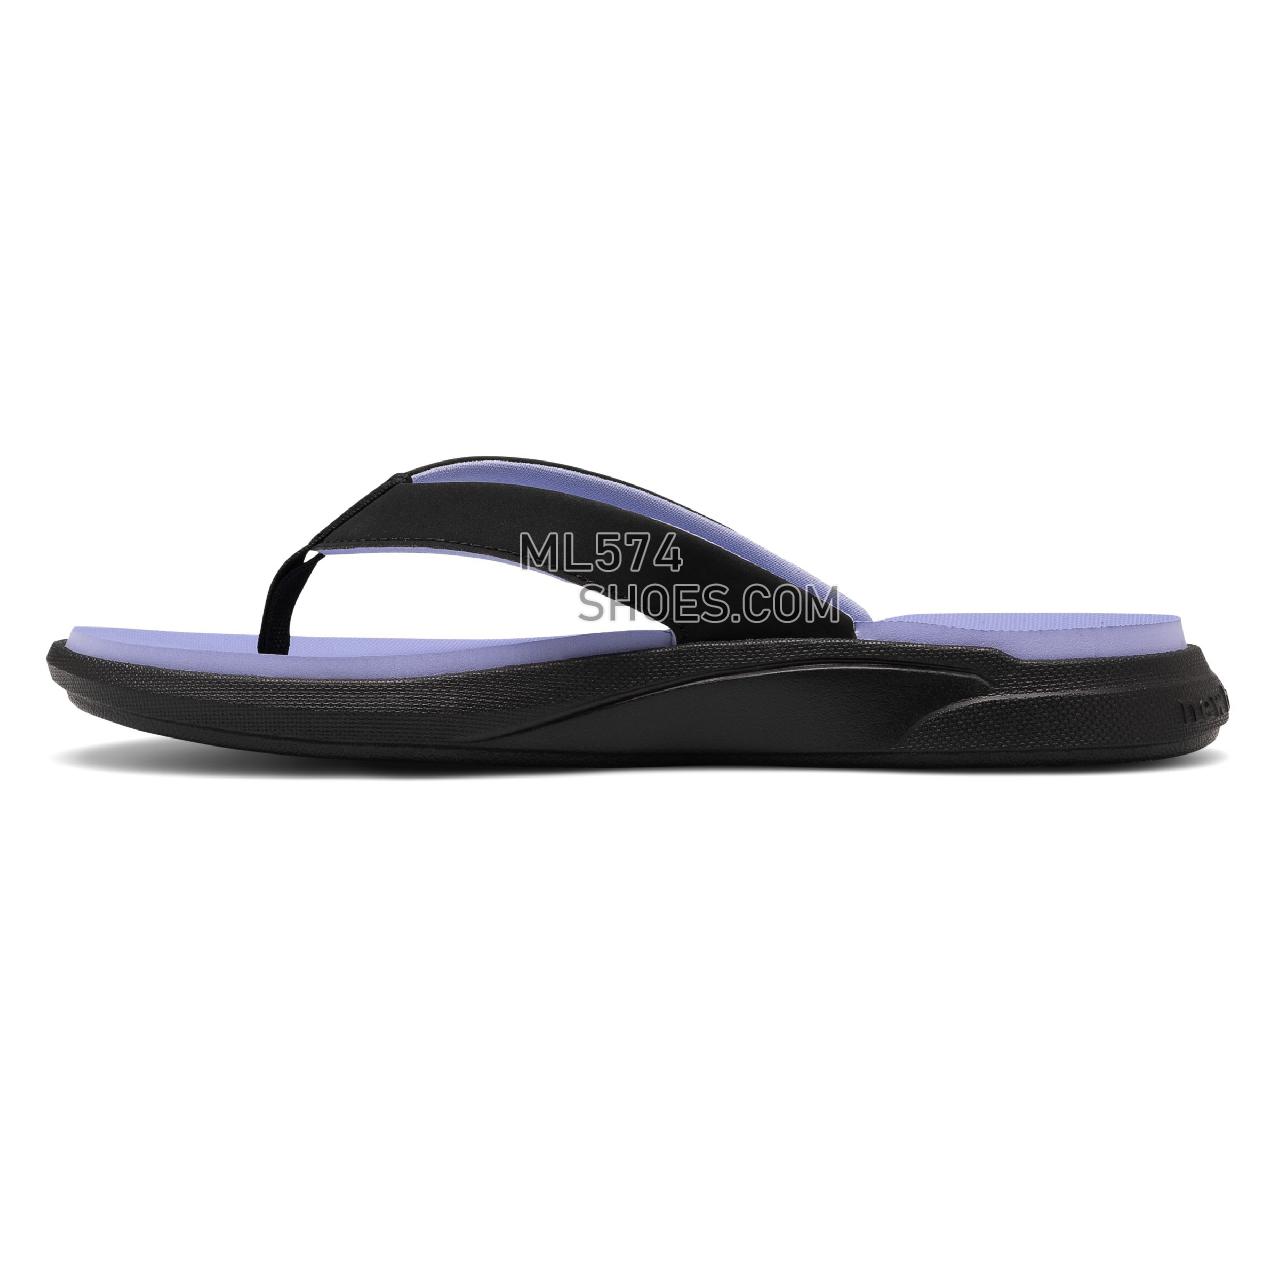 New Balance 340 - Women's Flip Flops - Black with Clear Amethyst and Silver Metallic - SWT340L1